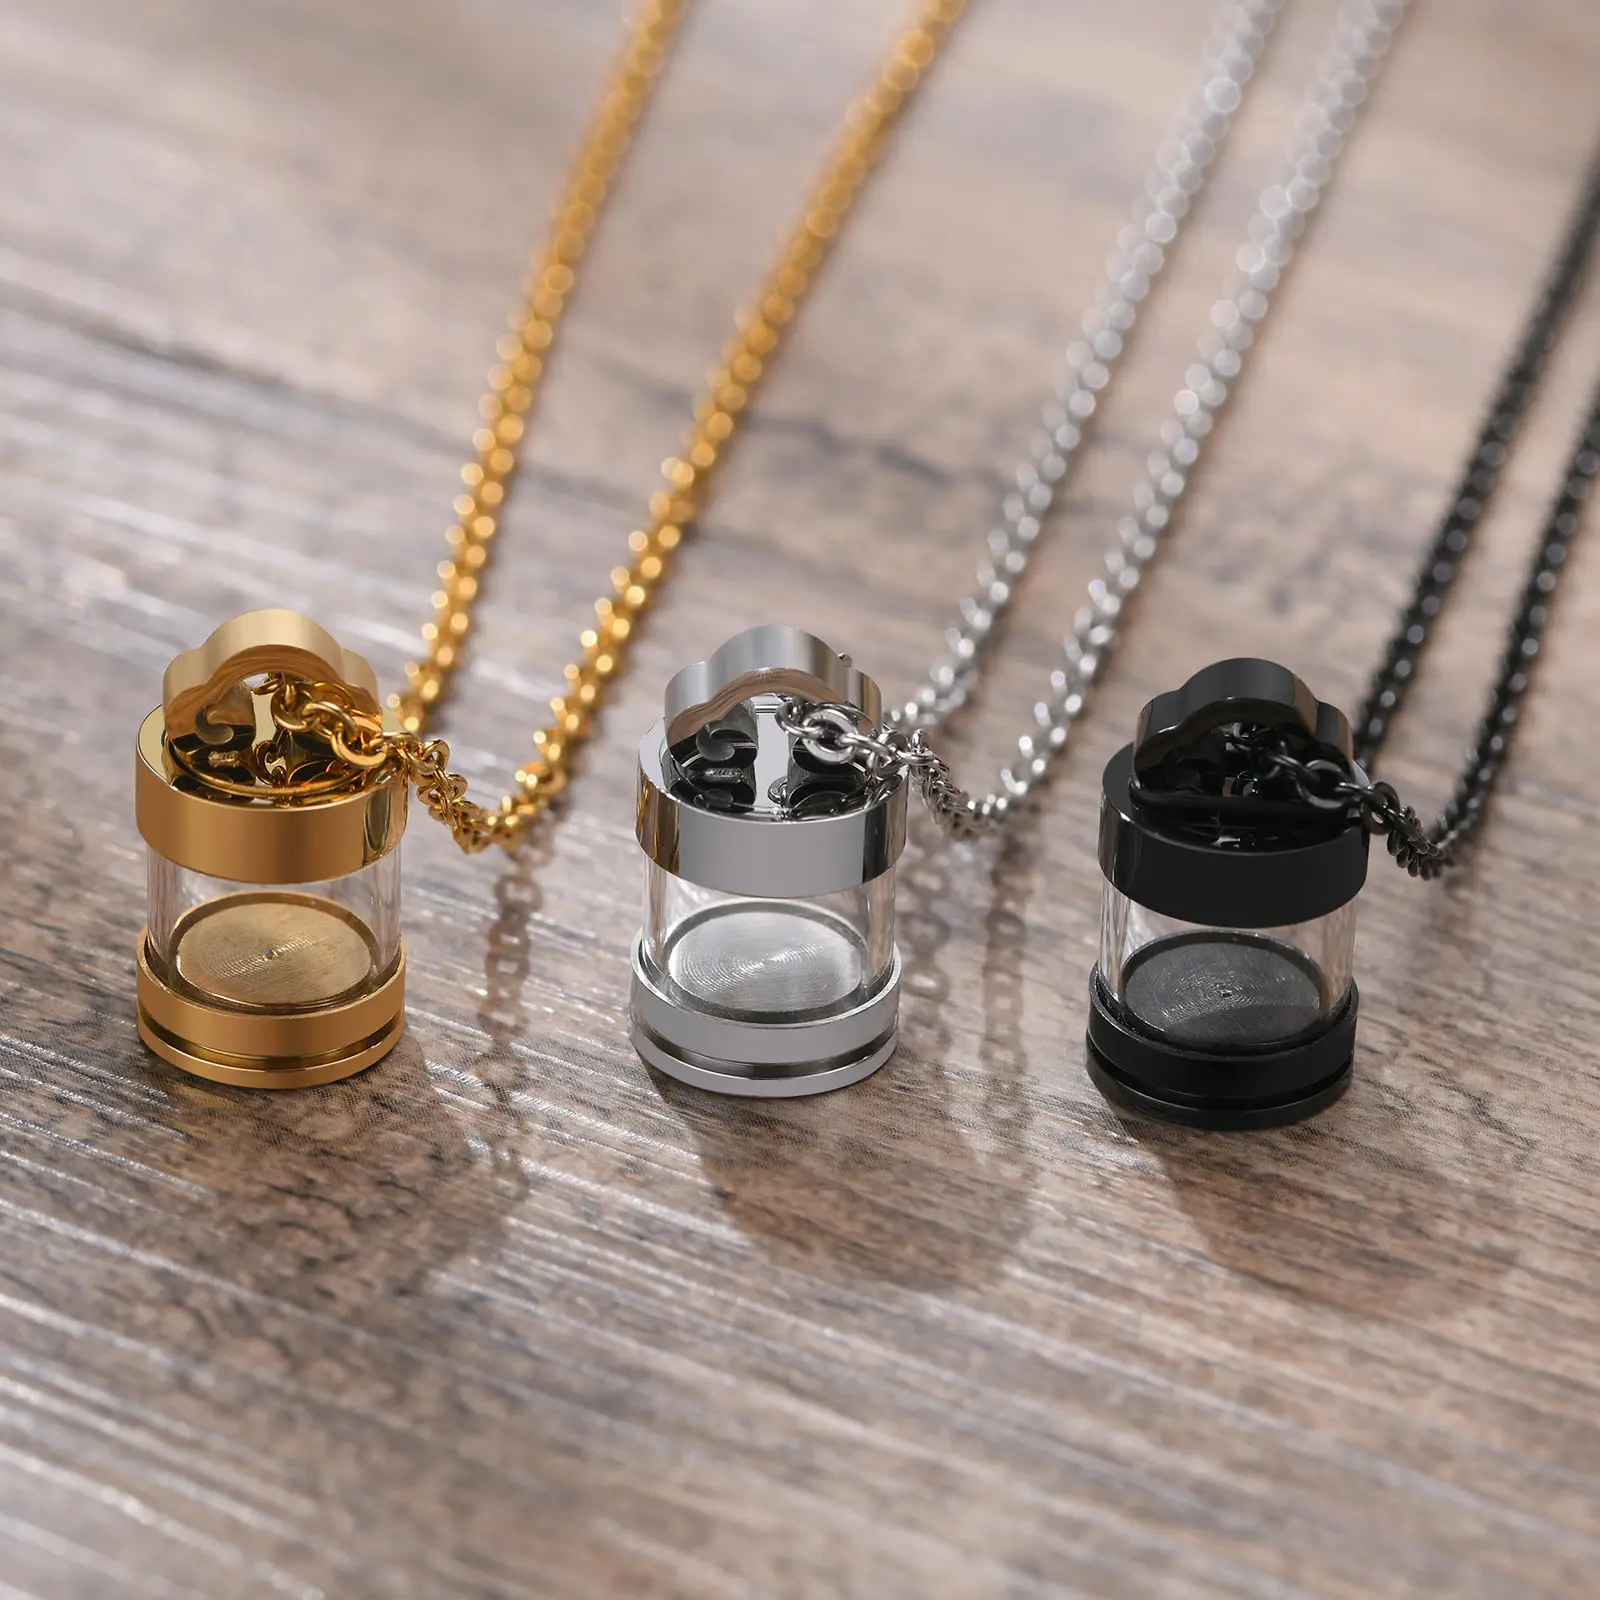 New Arrivals Openable Transparent Glass Bottle Cinerary Casket Pendant Stainless Steel Chain Necklace